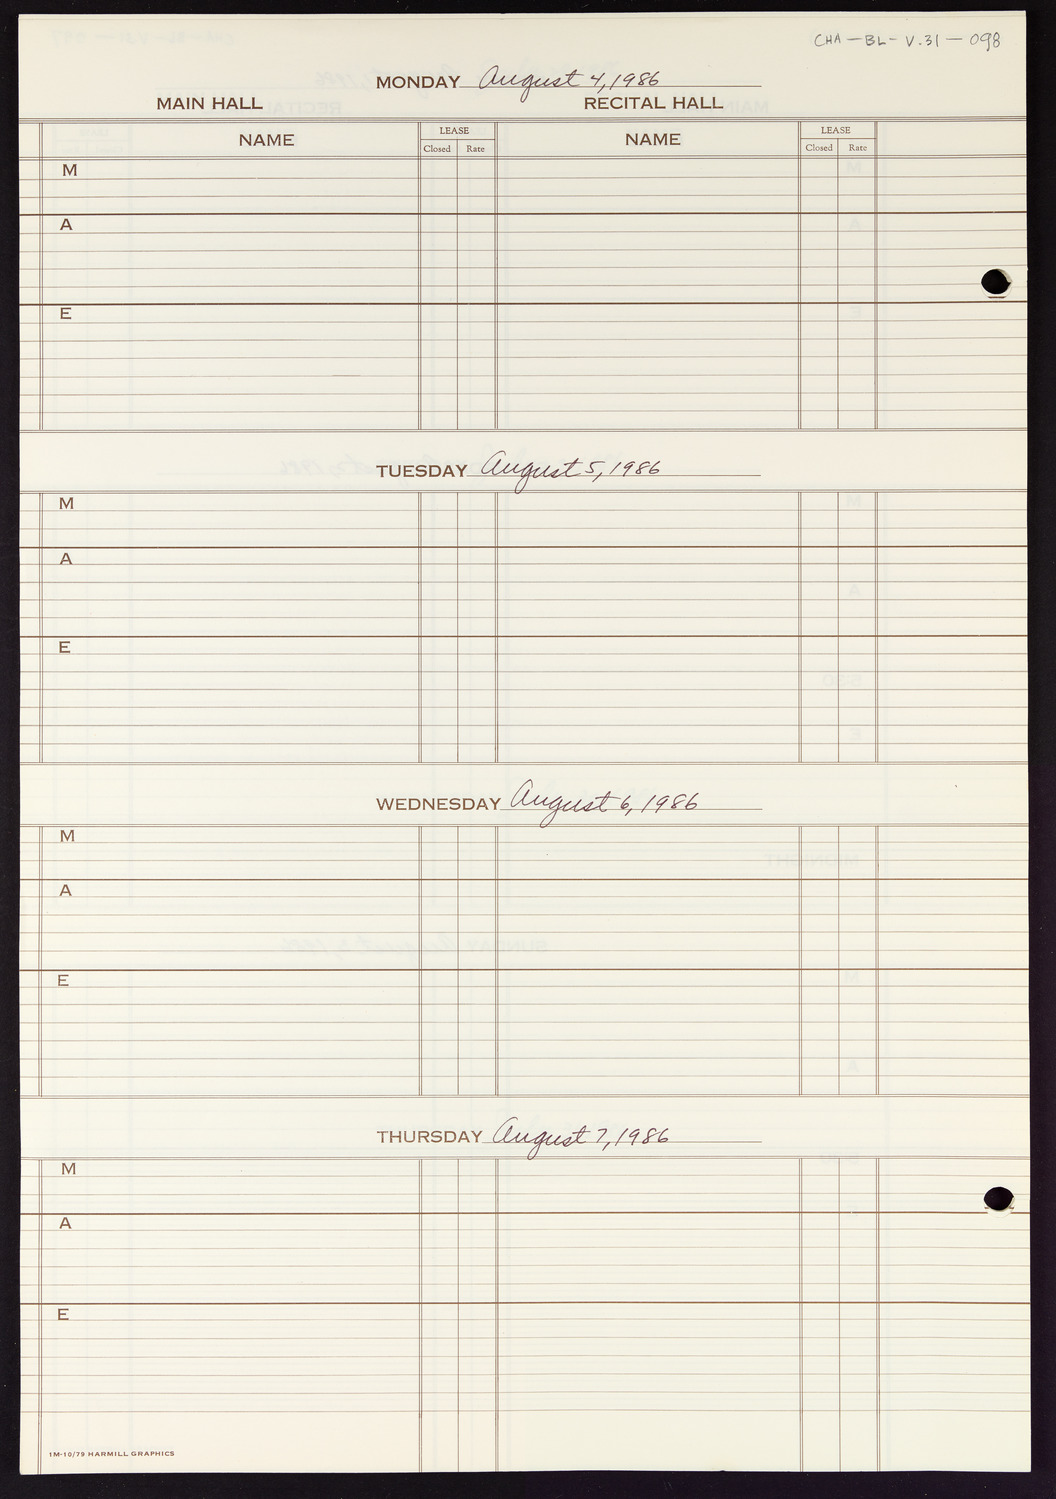 Carnegie Hall Booking Ledger, volume 31, page 98